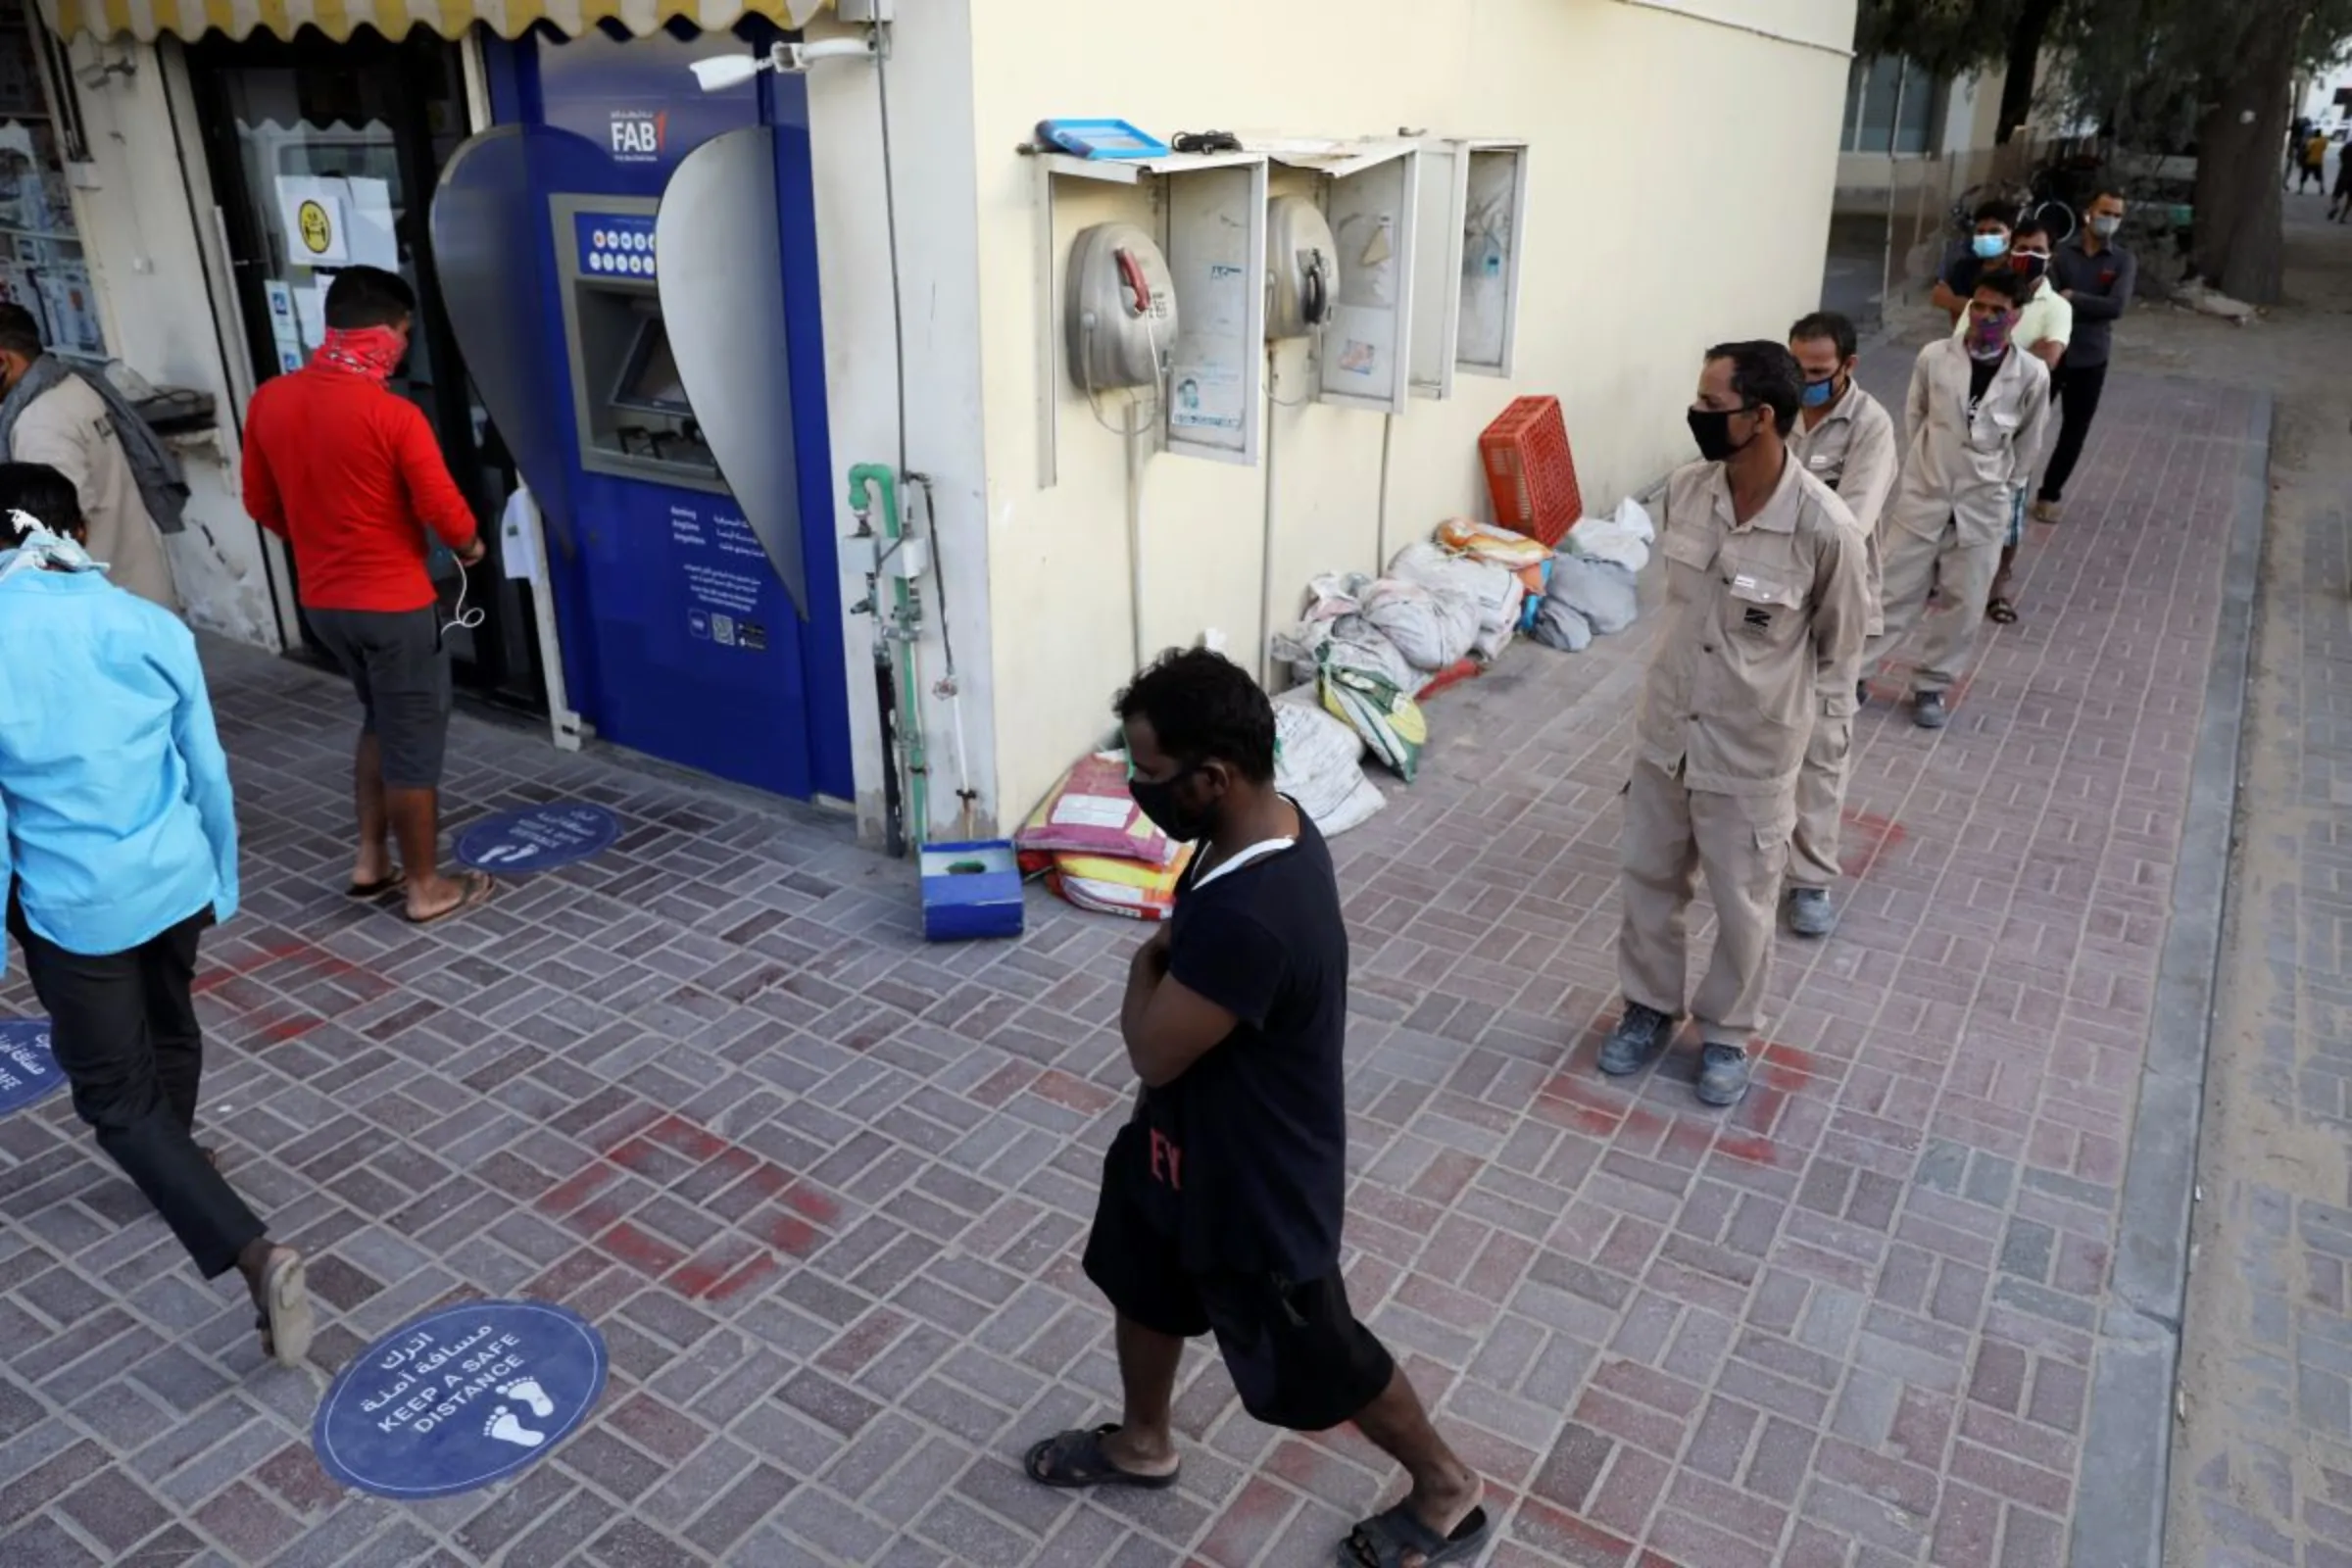 Foreign workers wearing protective face masks queue to use an ATM, in the Al Quoz industrial district of Dubai, United Arab Emirates, April 14, 2020